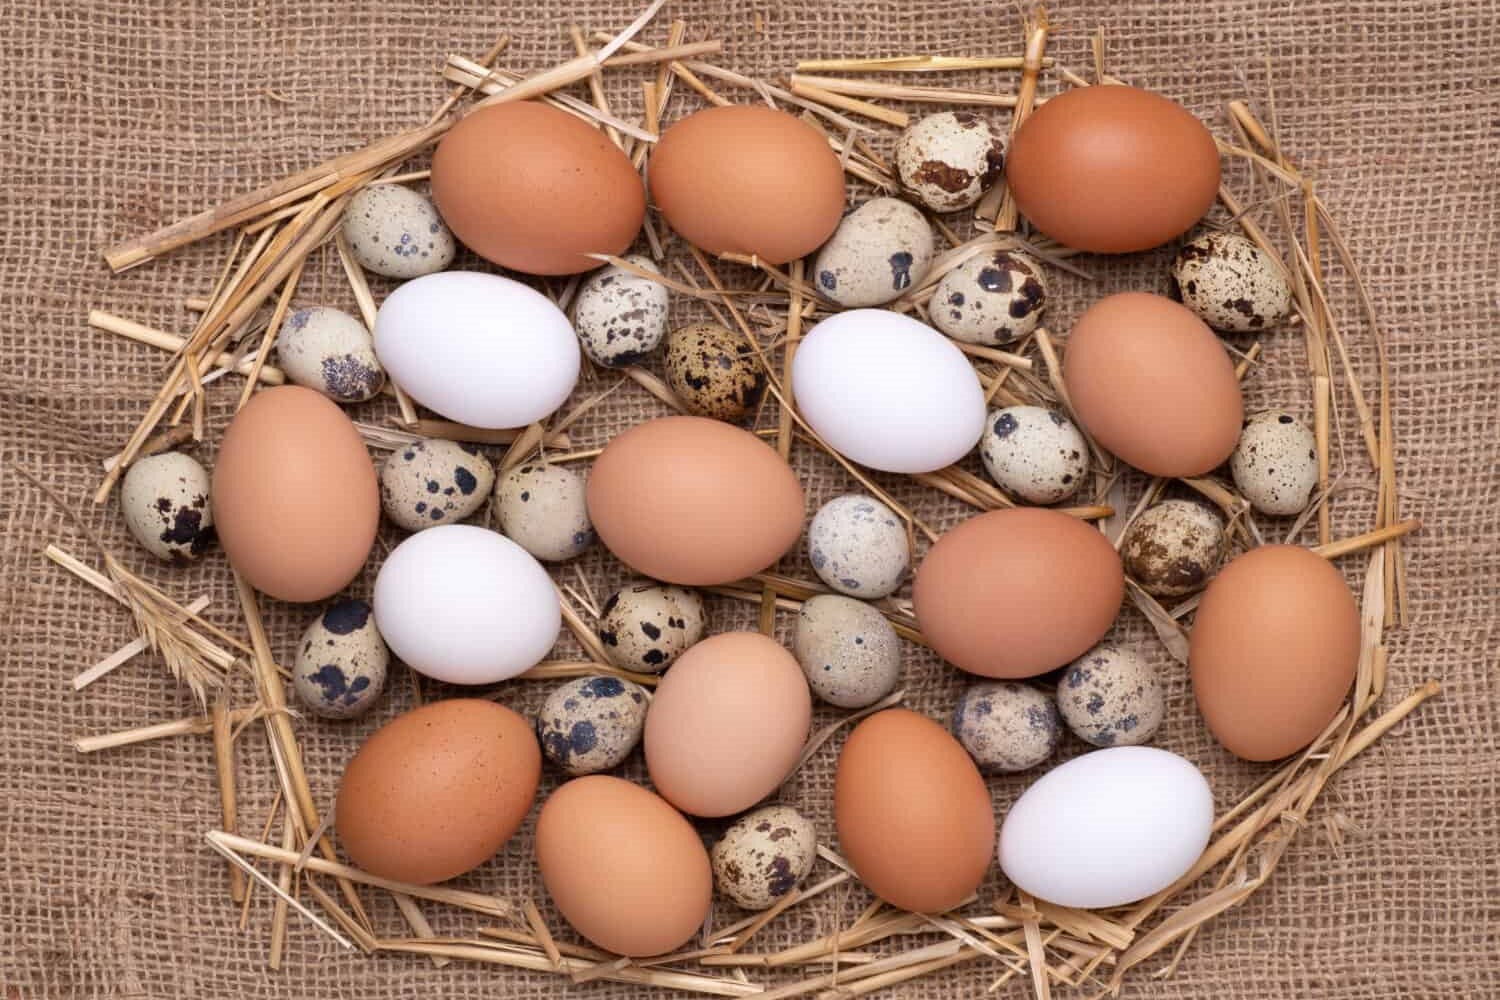 Discover The Surprising Nutritional Benefits Of Quail Eggs Compared To Chicken Eggs!